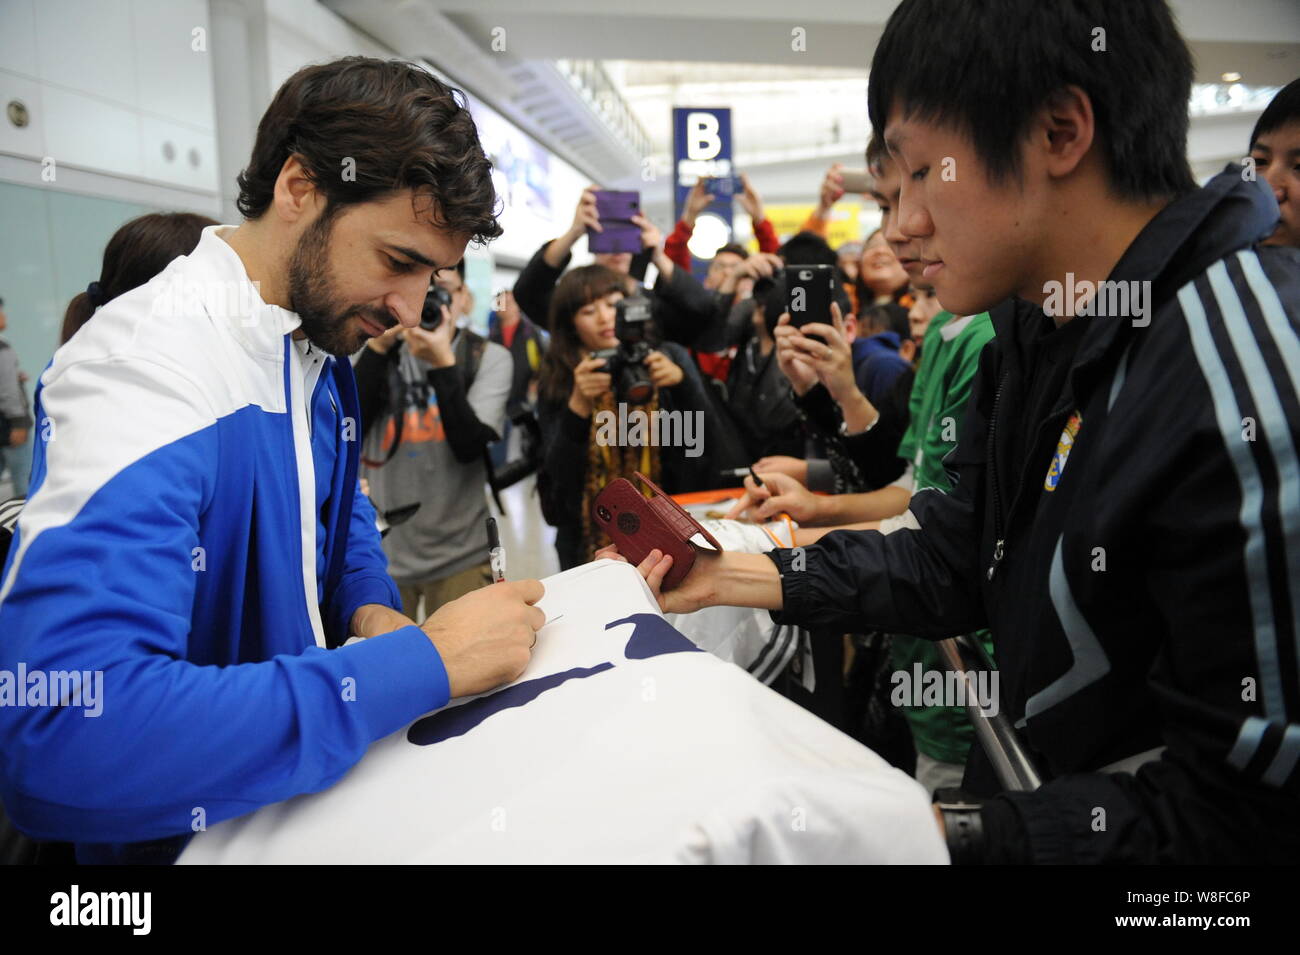 Spanish football star Raul Gonzalez Blanco of New York Cosmos, left, signs autographs for fans as he arrives at the Hong Kong International Airport in Stock Photo